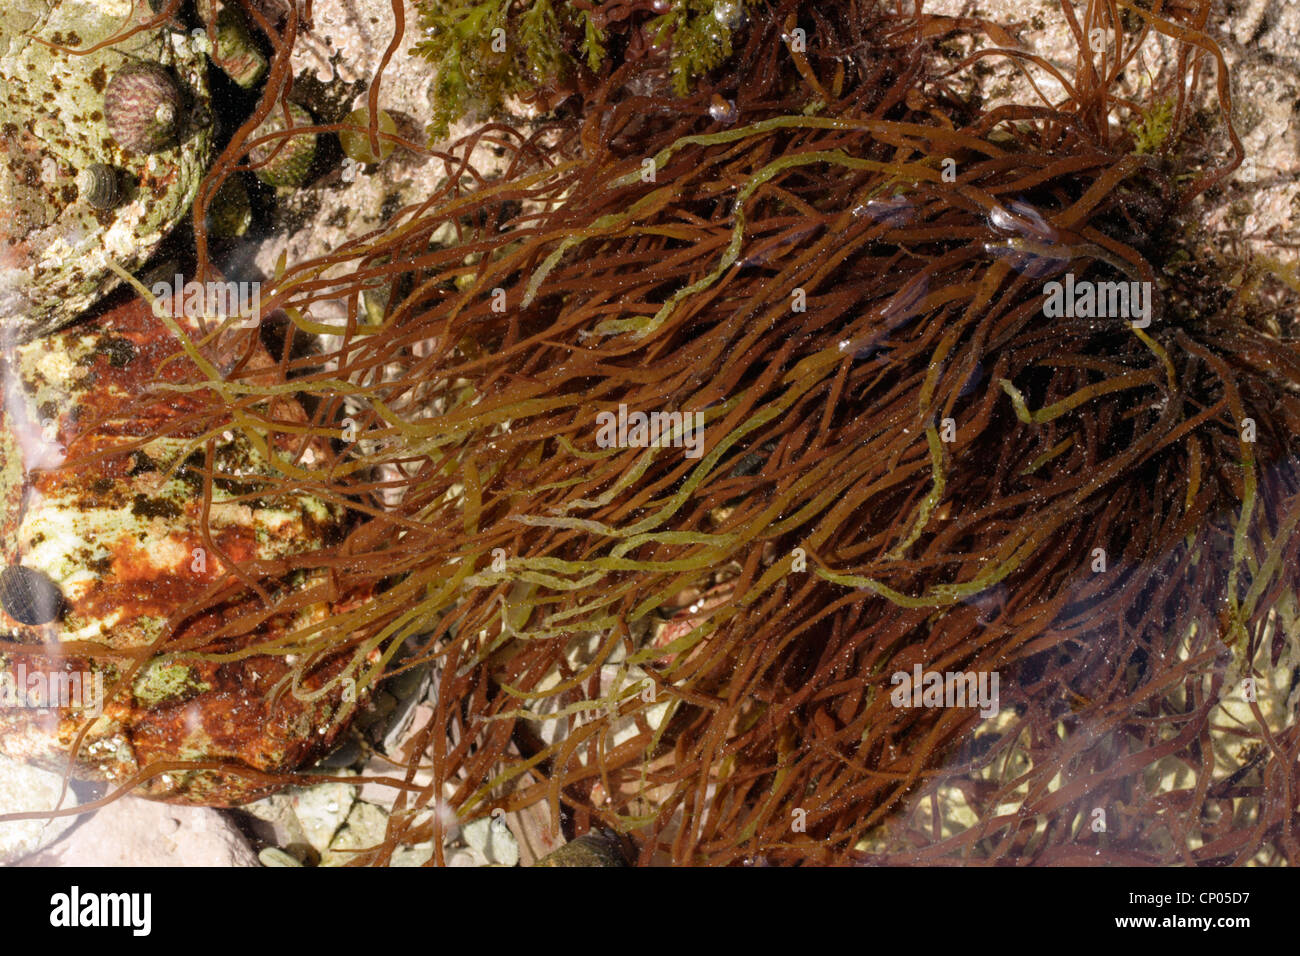 A red seaweed (Dumontia contorta) in a rockpool. Stock Photo